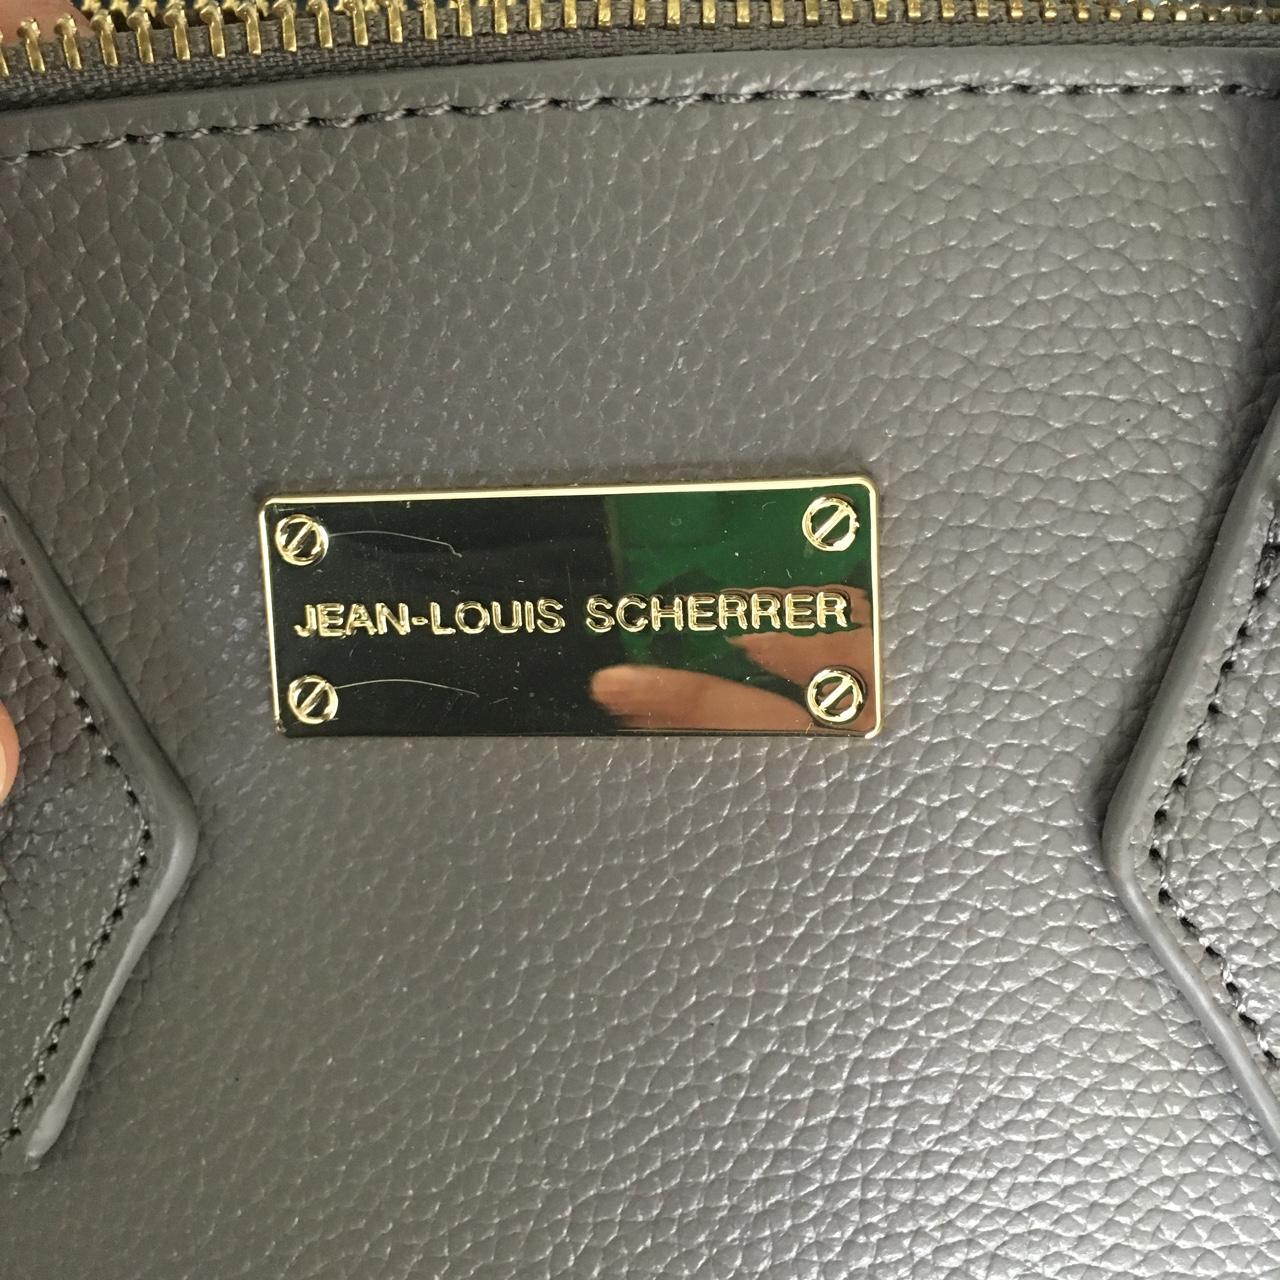 Jean-Louis Scherrer bag. French brand. Used once.